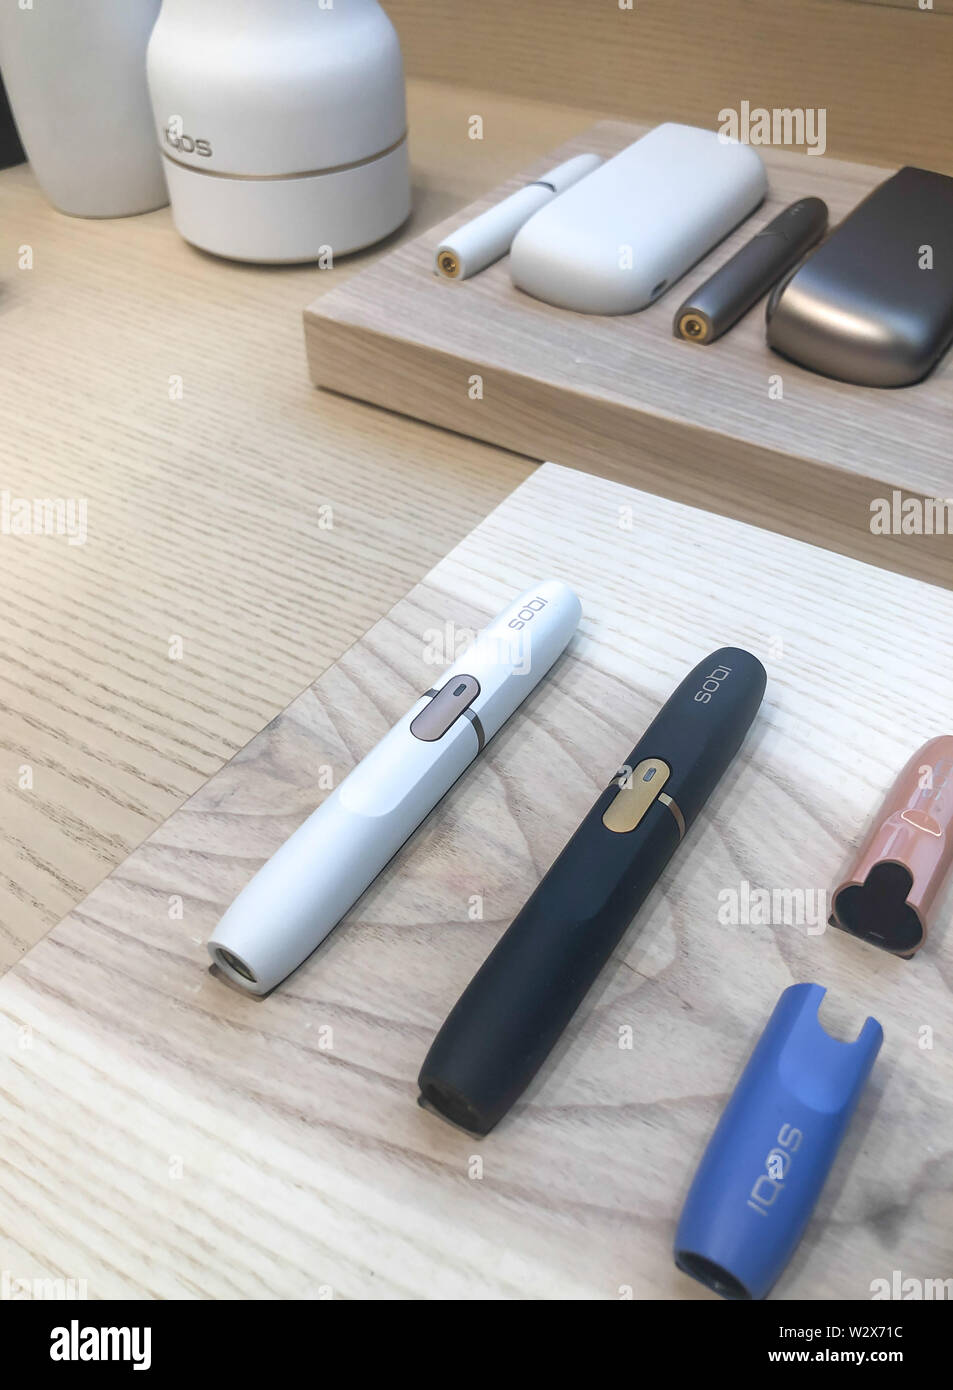 MOSCOW, RUSSIA - FEBRUARY 04, 2019: Iqos electronic cigarette philip morris in Iqos store Stock Photo